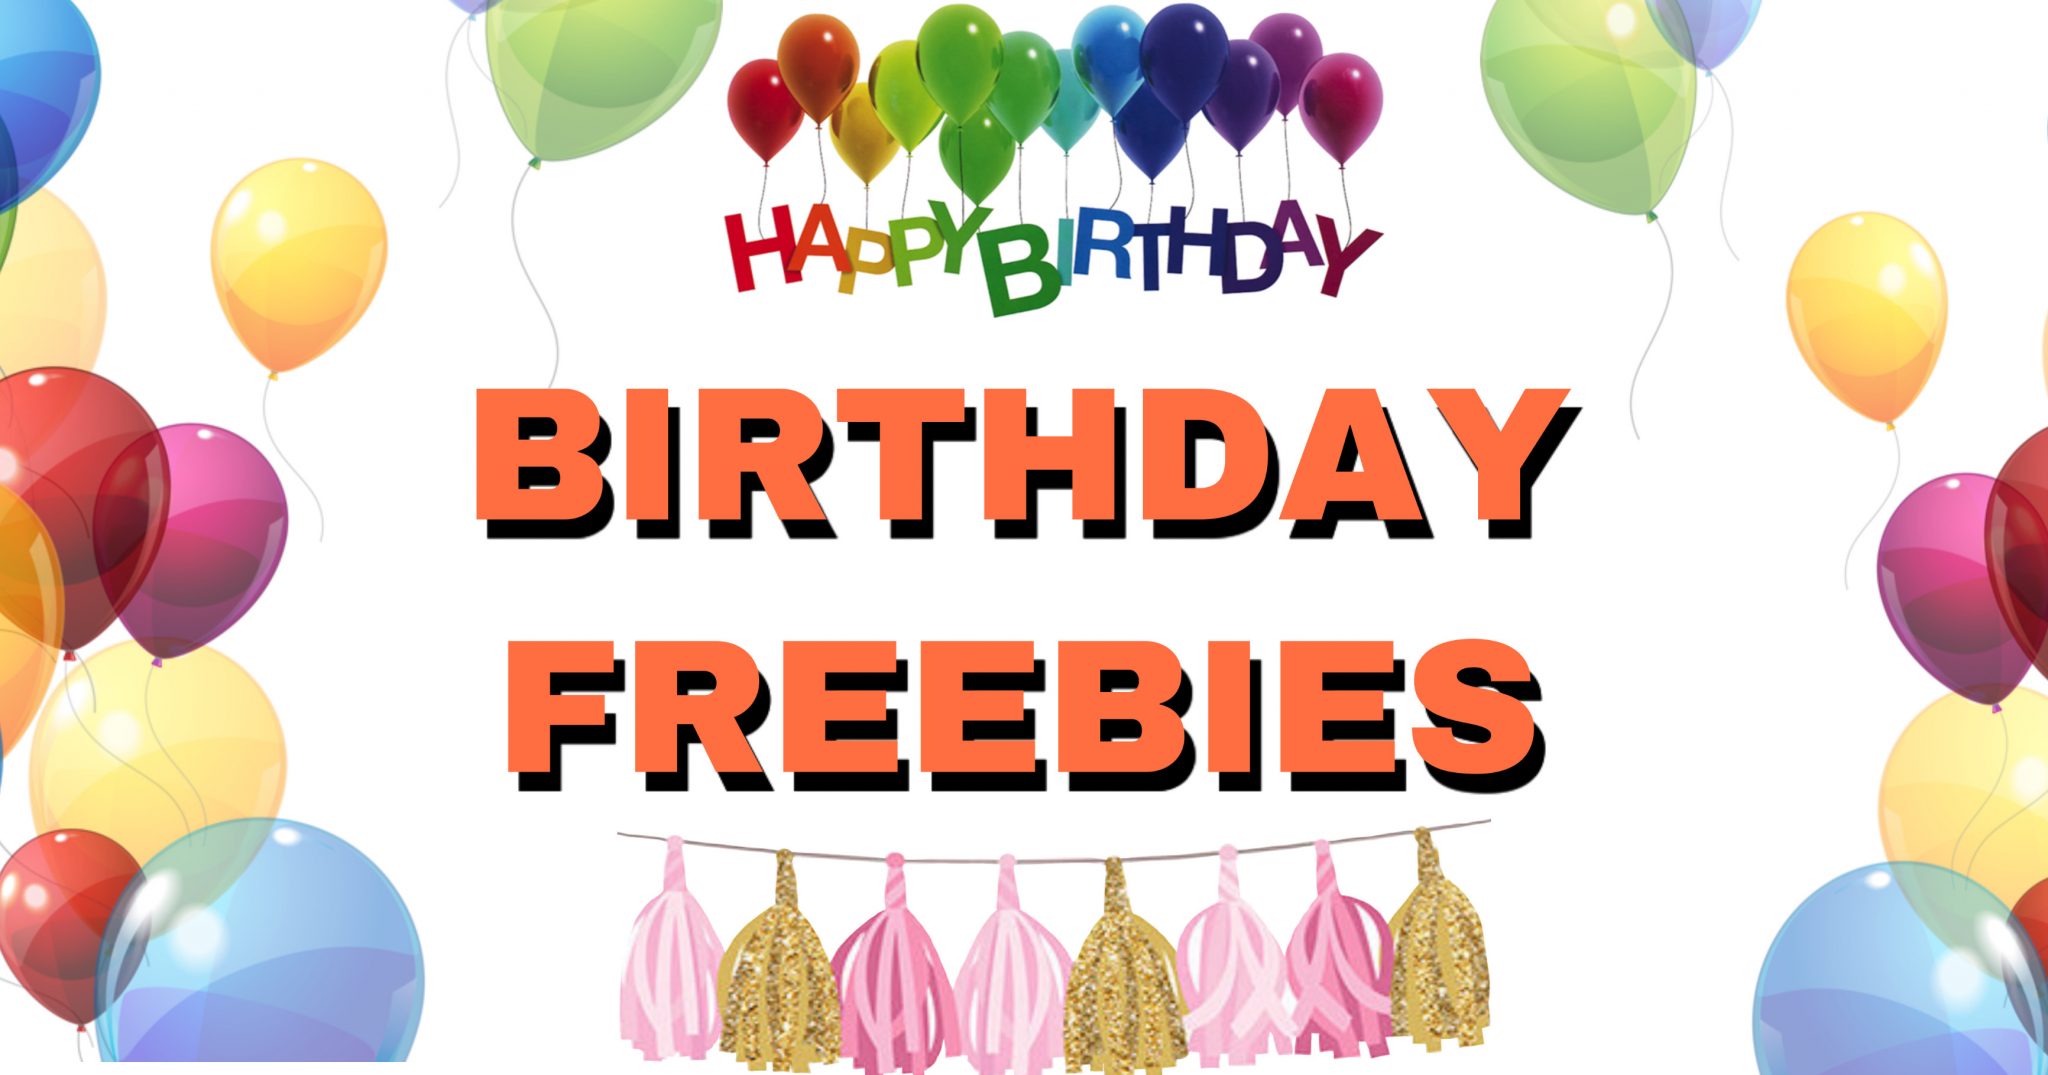 Popular Places To Get Your Birthday Freebies